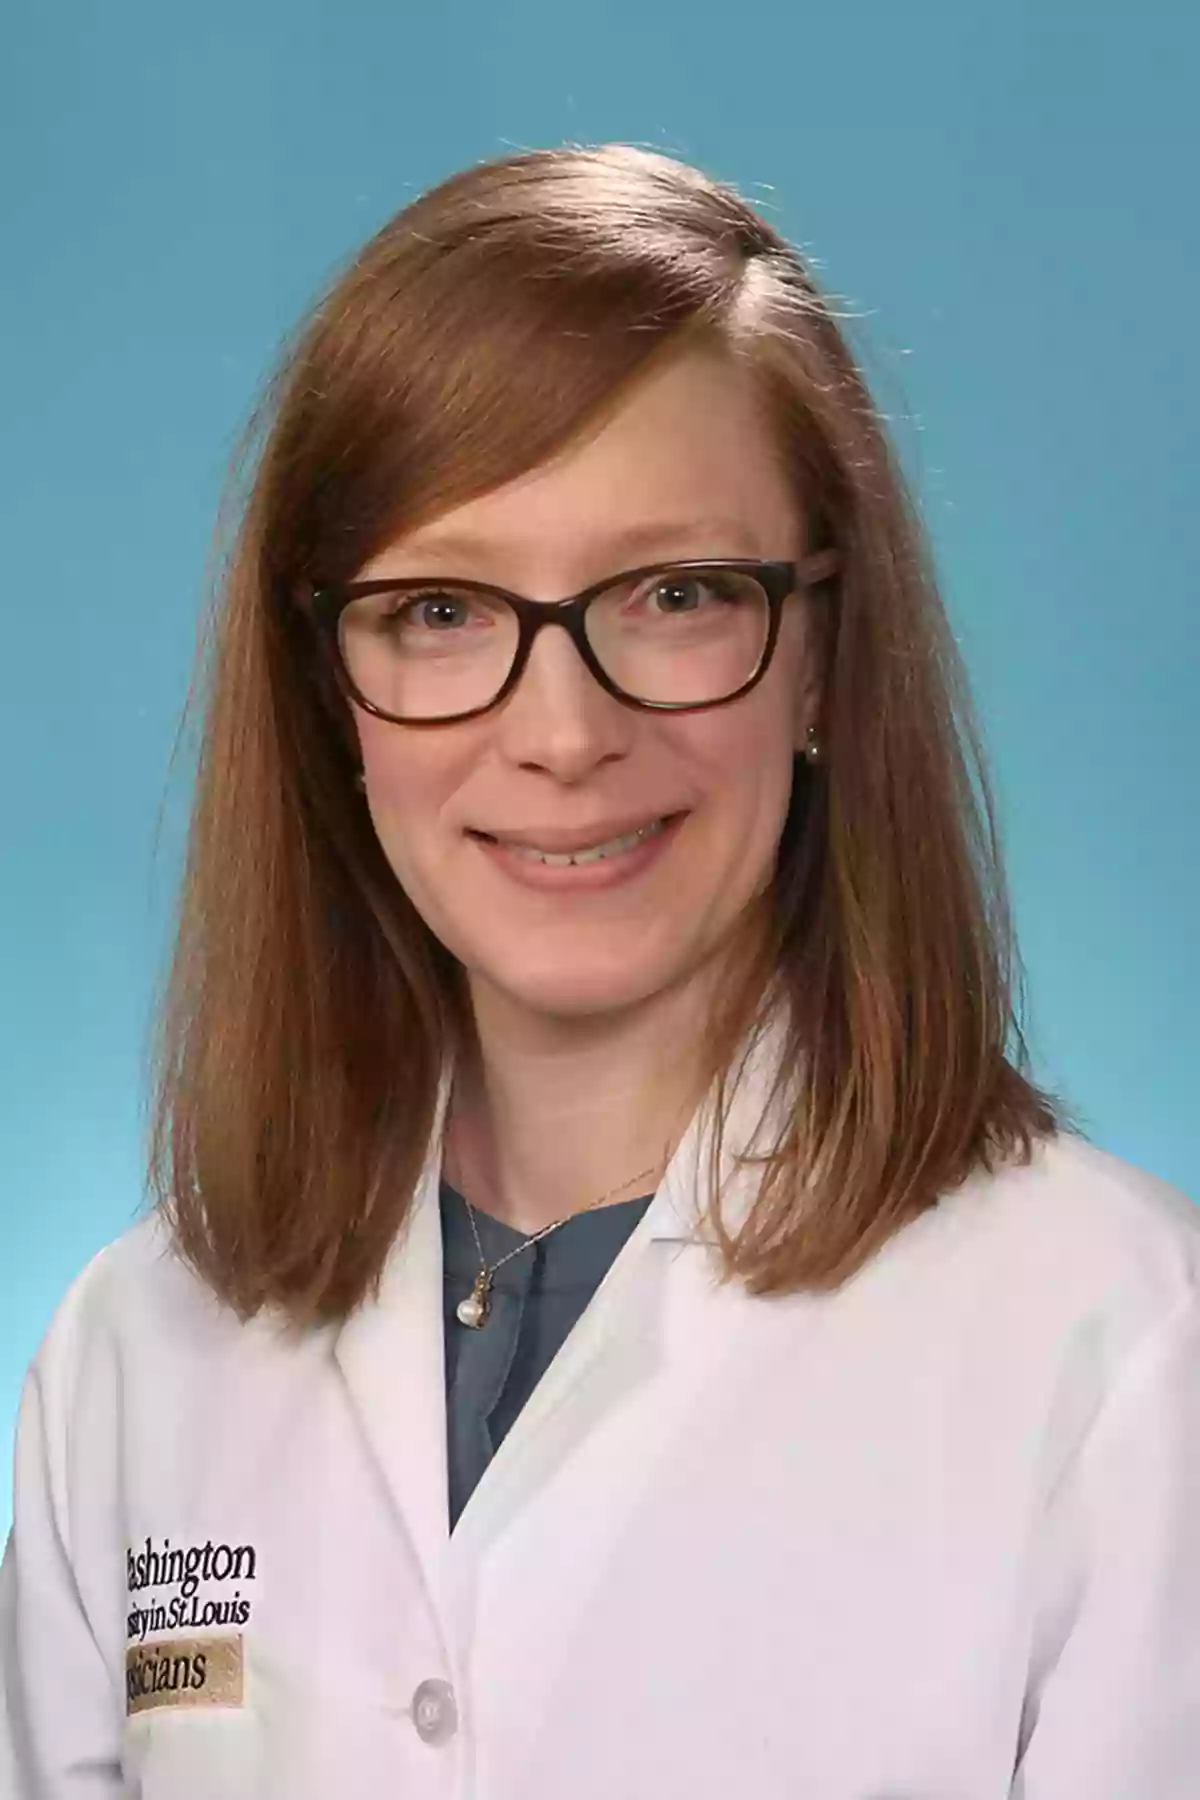 Melissa A. Reimers, MD